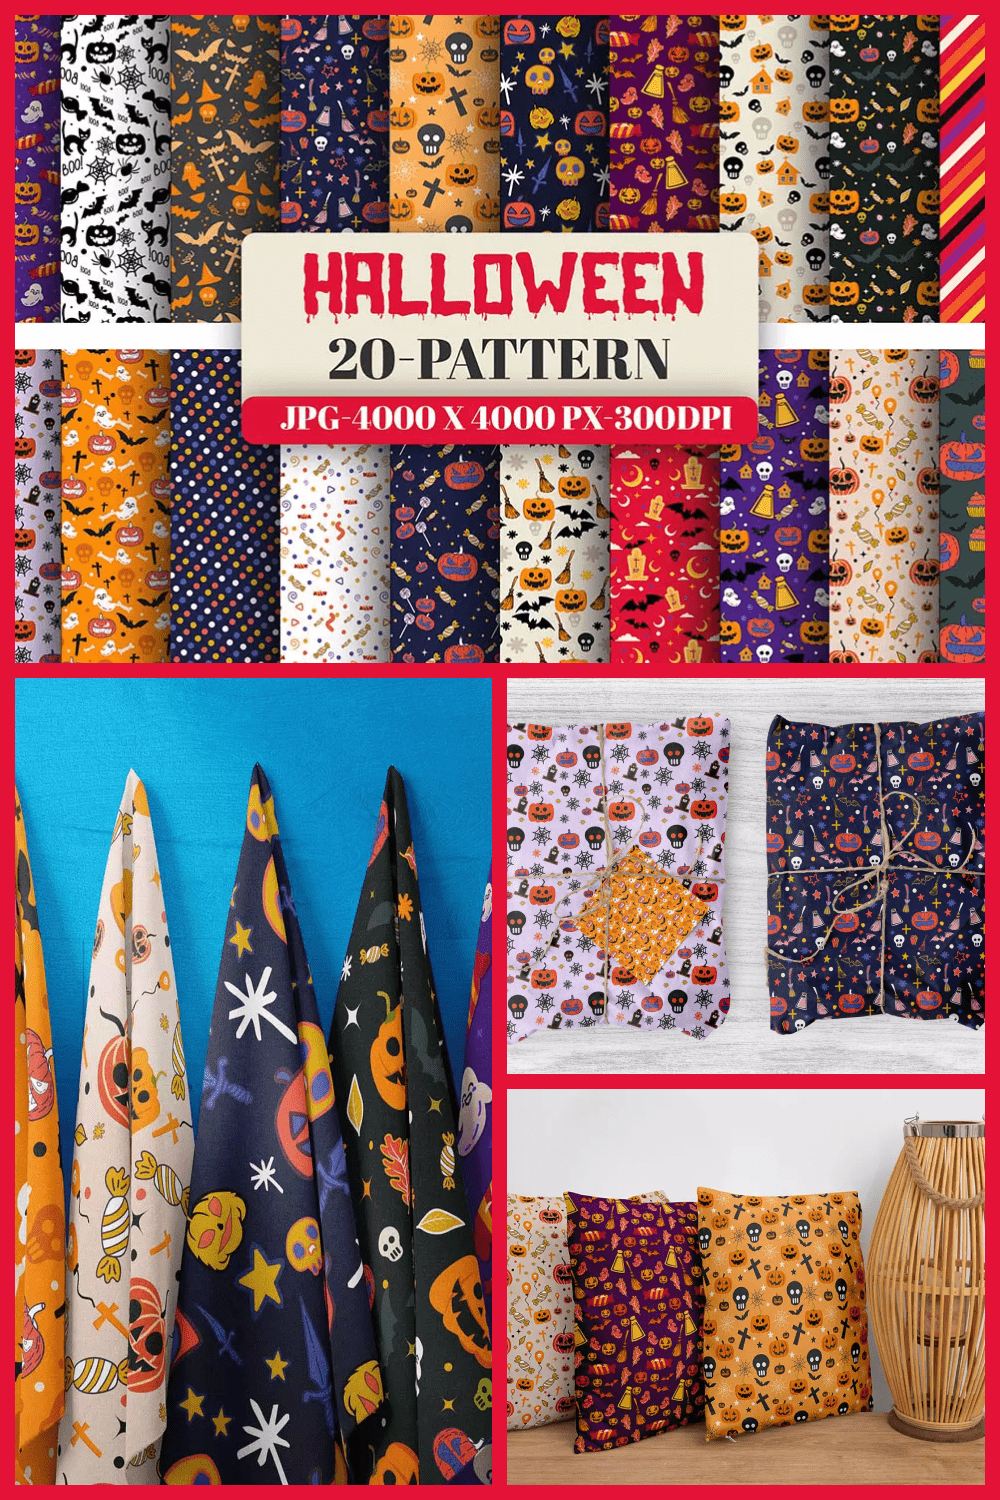 Collage of wrapping paper rolls, pillows and gifts with Halloween symbols.